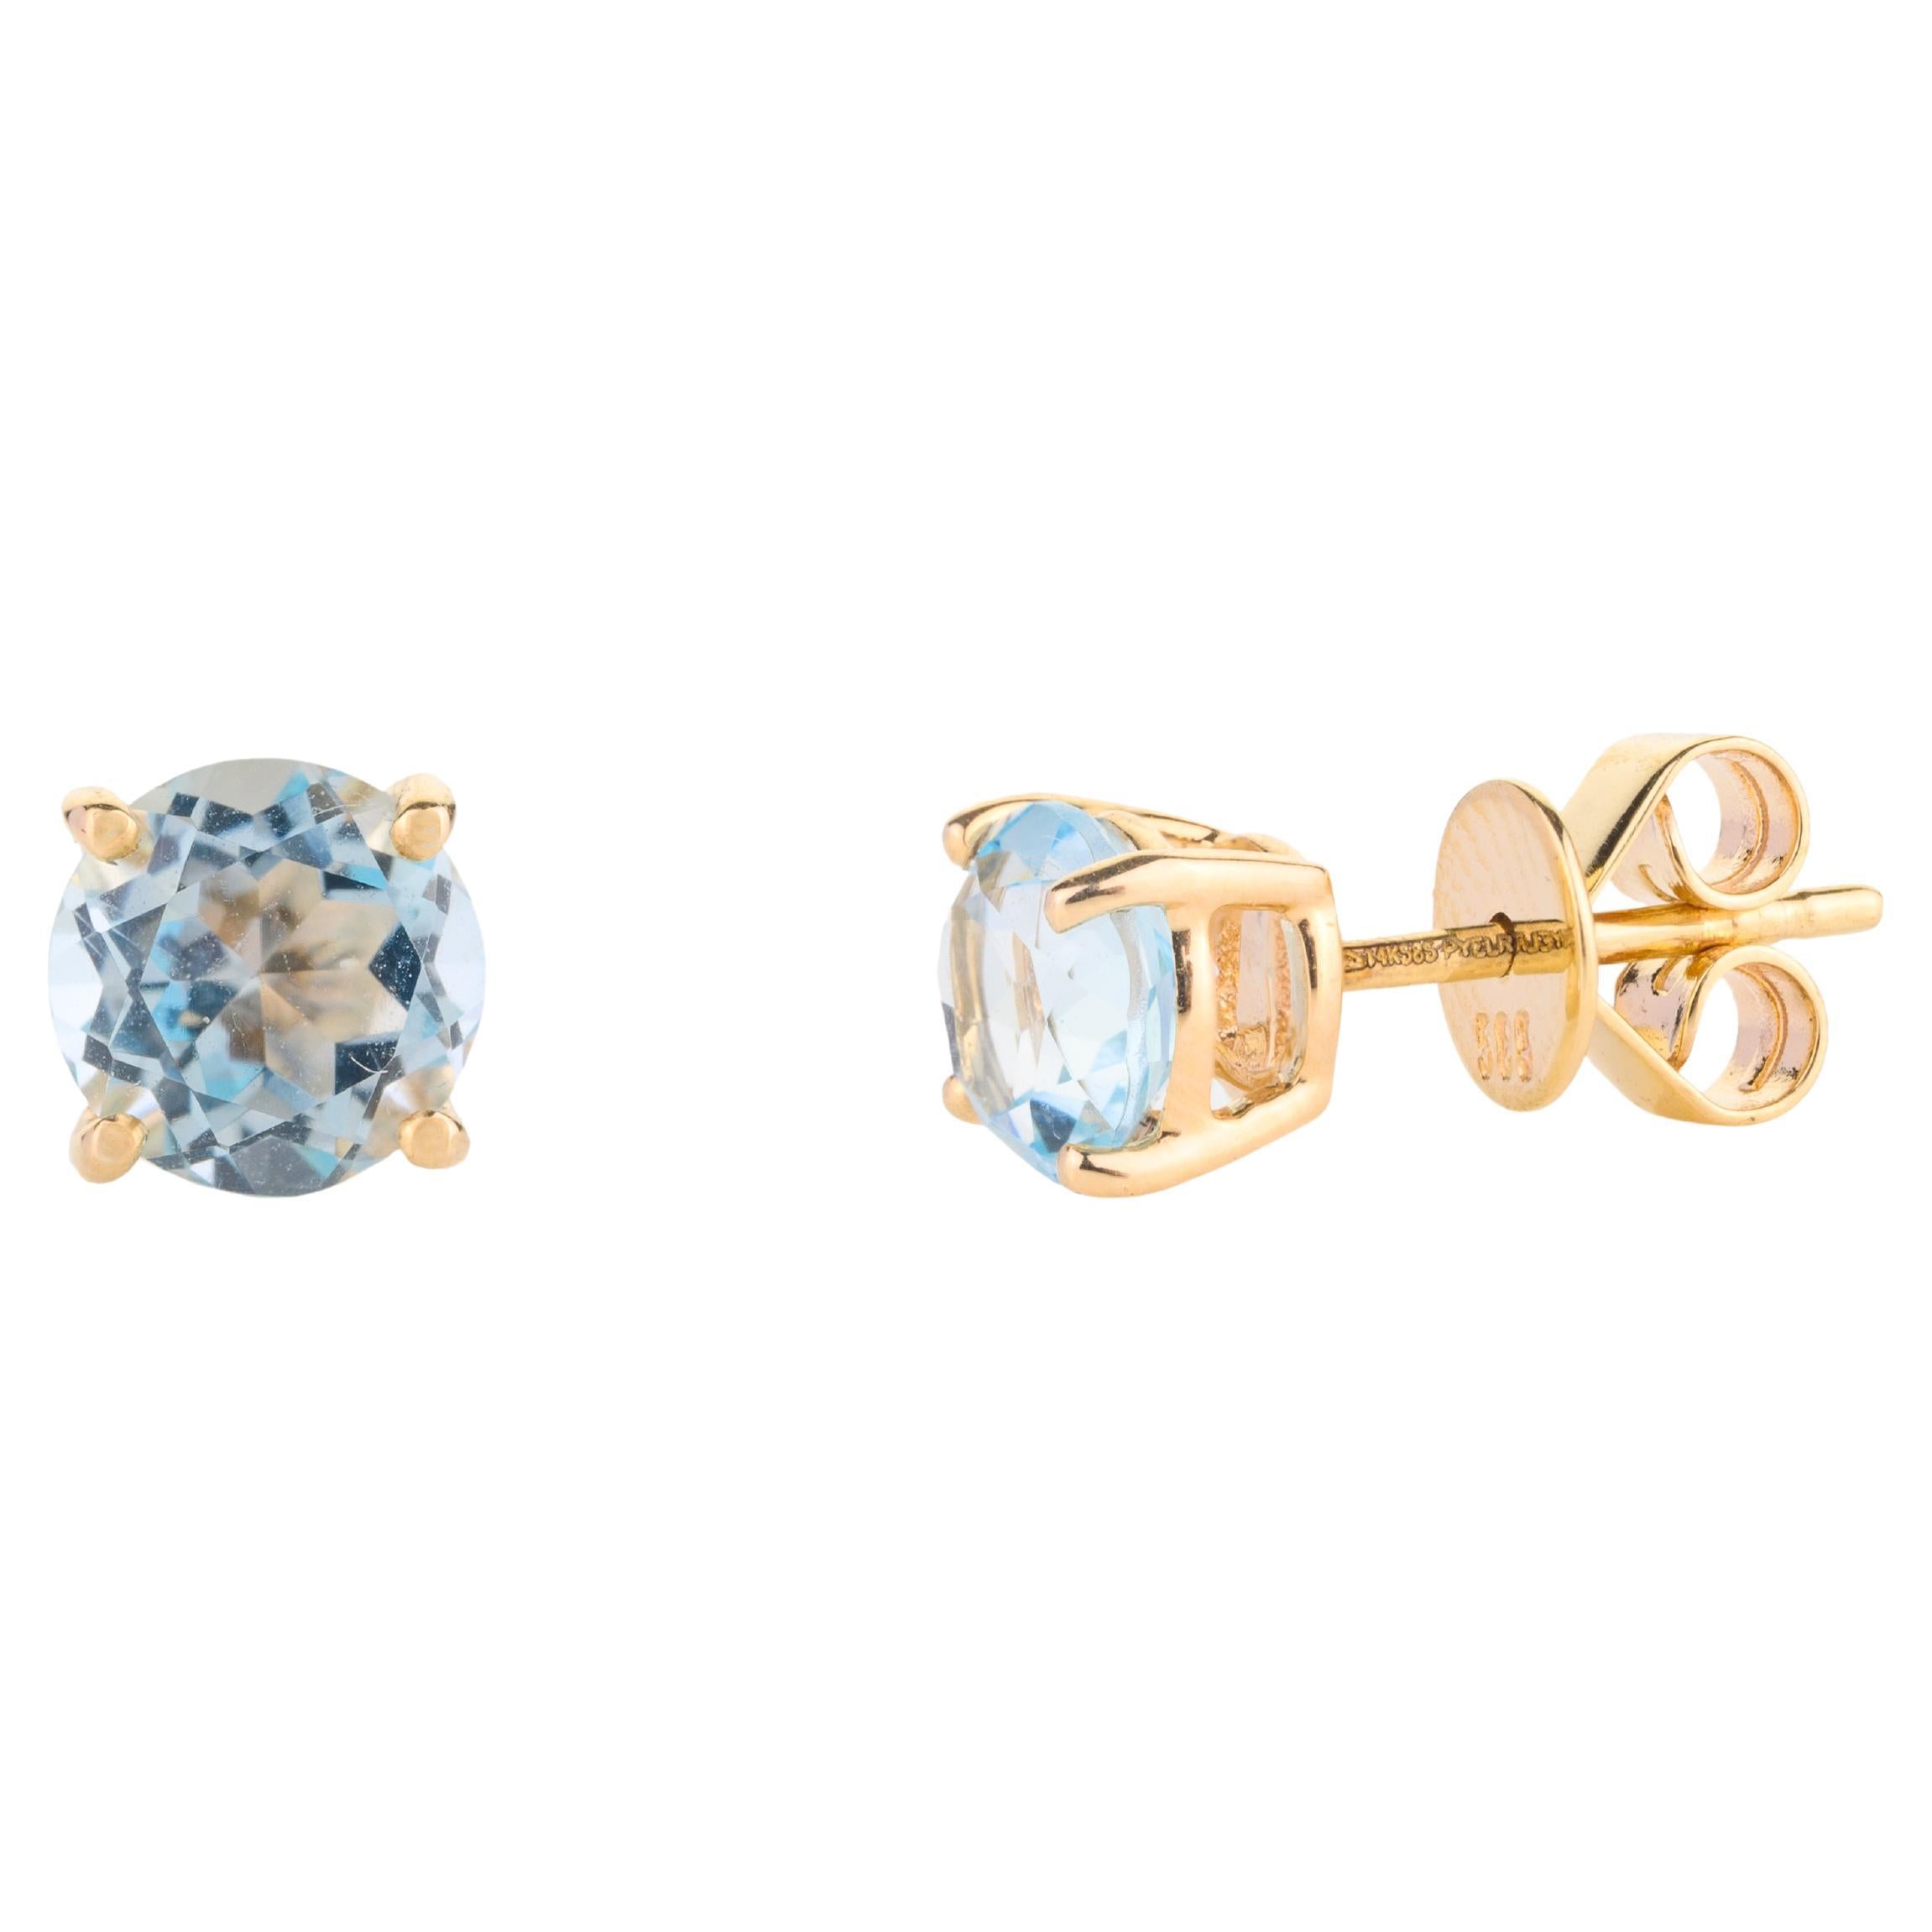 2.13 Carats Blue Topaz Pushback Stud Earrings for Her in 14k Solid Yellow Gold For Sale